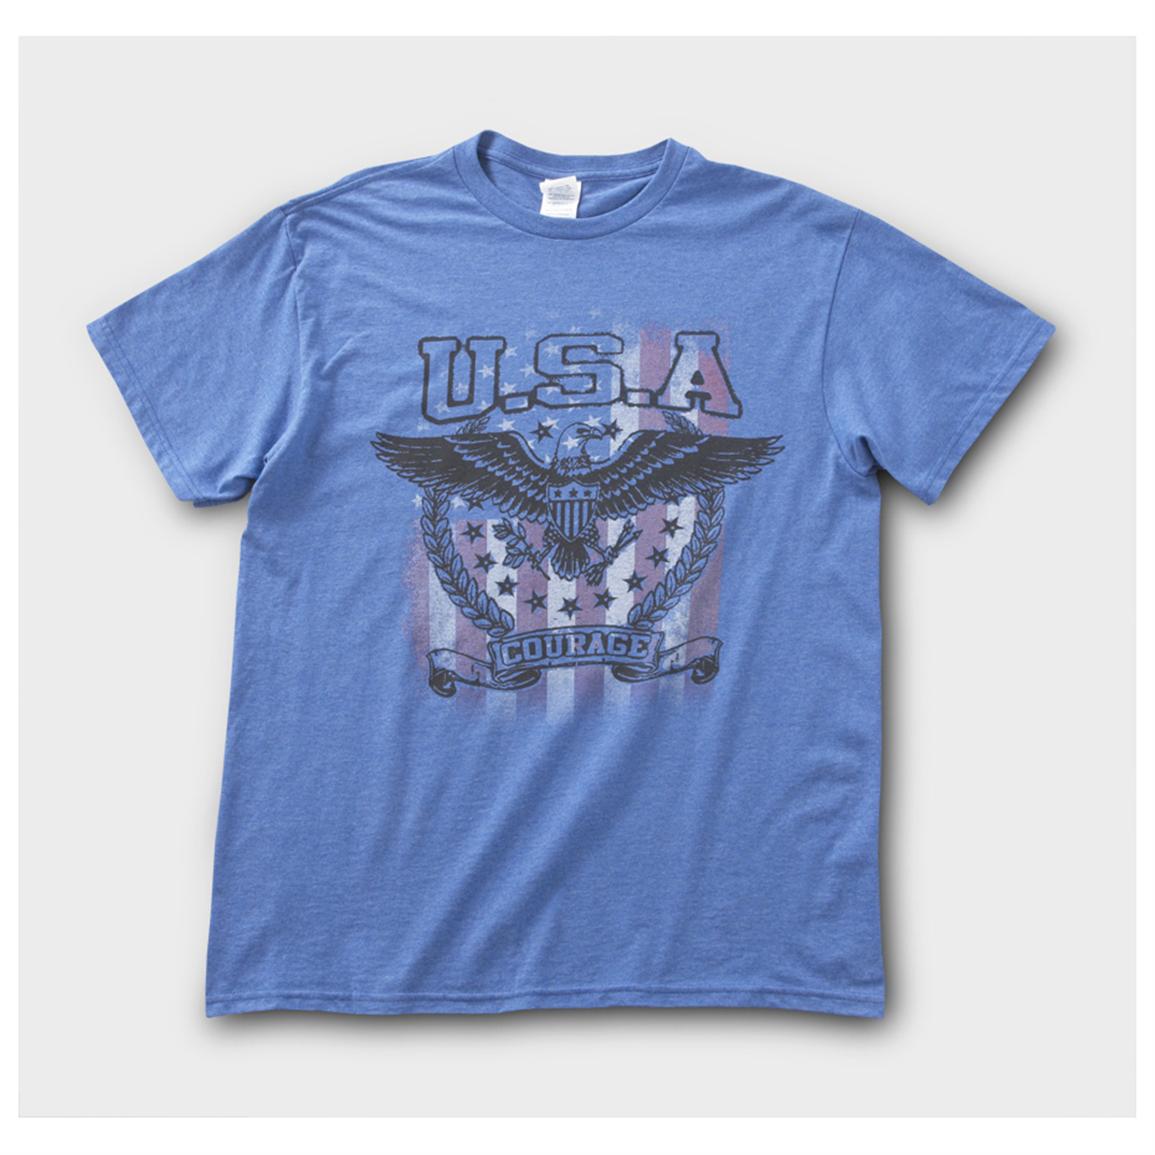 Patriotic Graphic T-shirt - 420812, T-Shirts at Sportsman's Guide